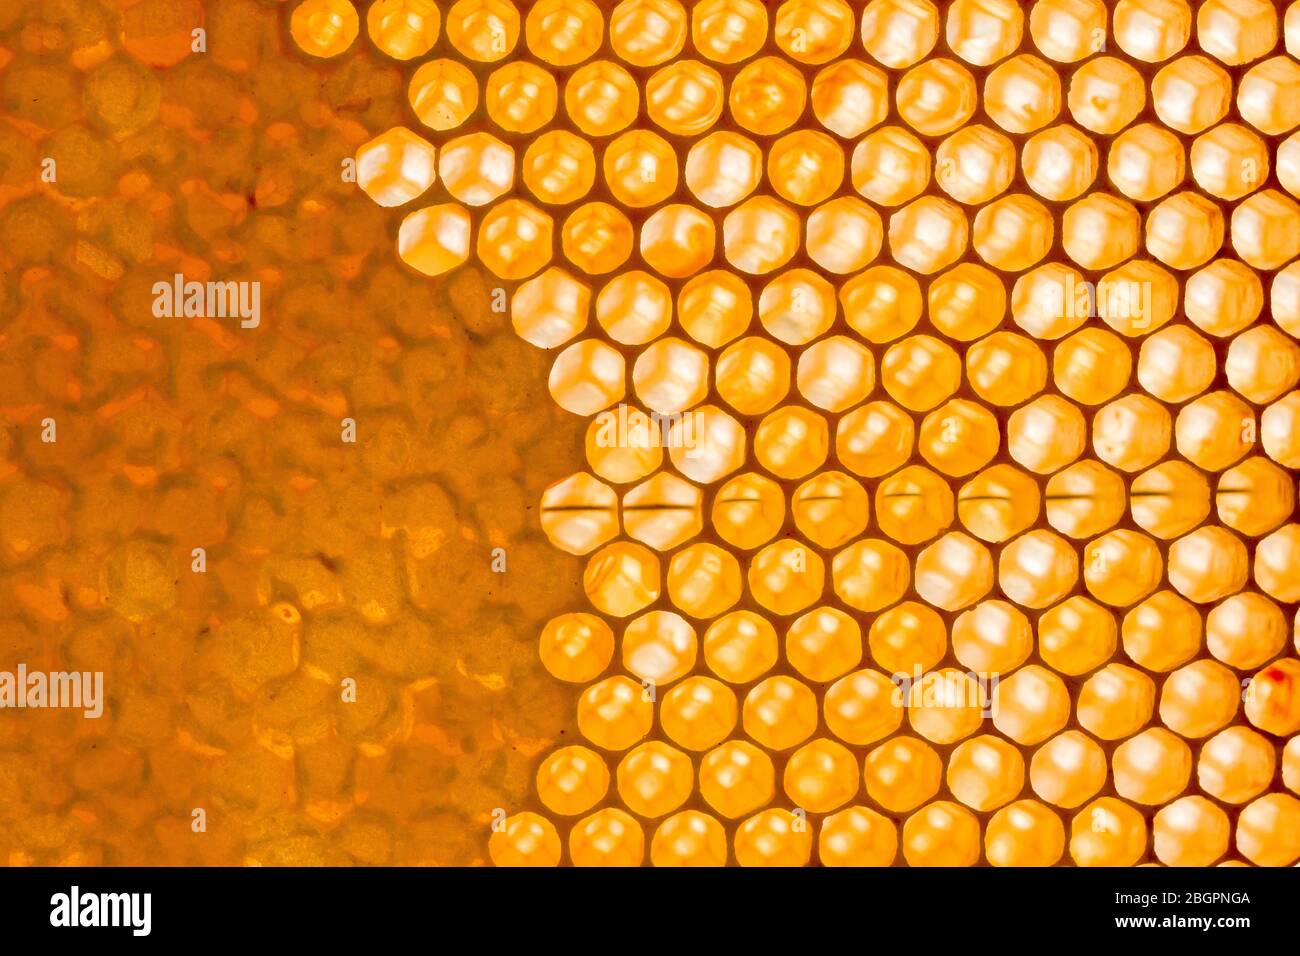 Hexagonal beehive pattern of a honeycomb divider, some of the cells sealed Stock Photo